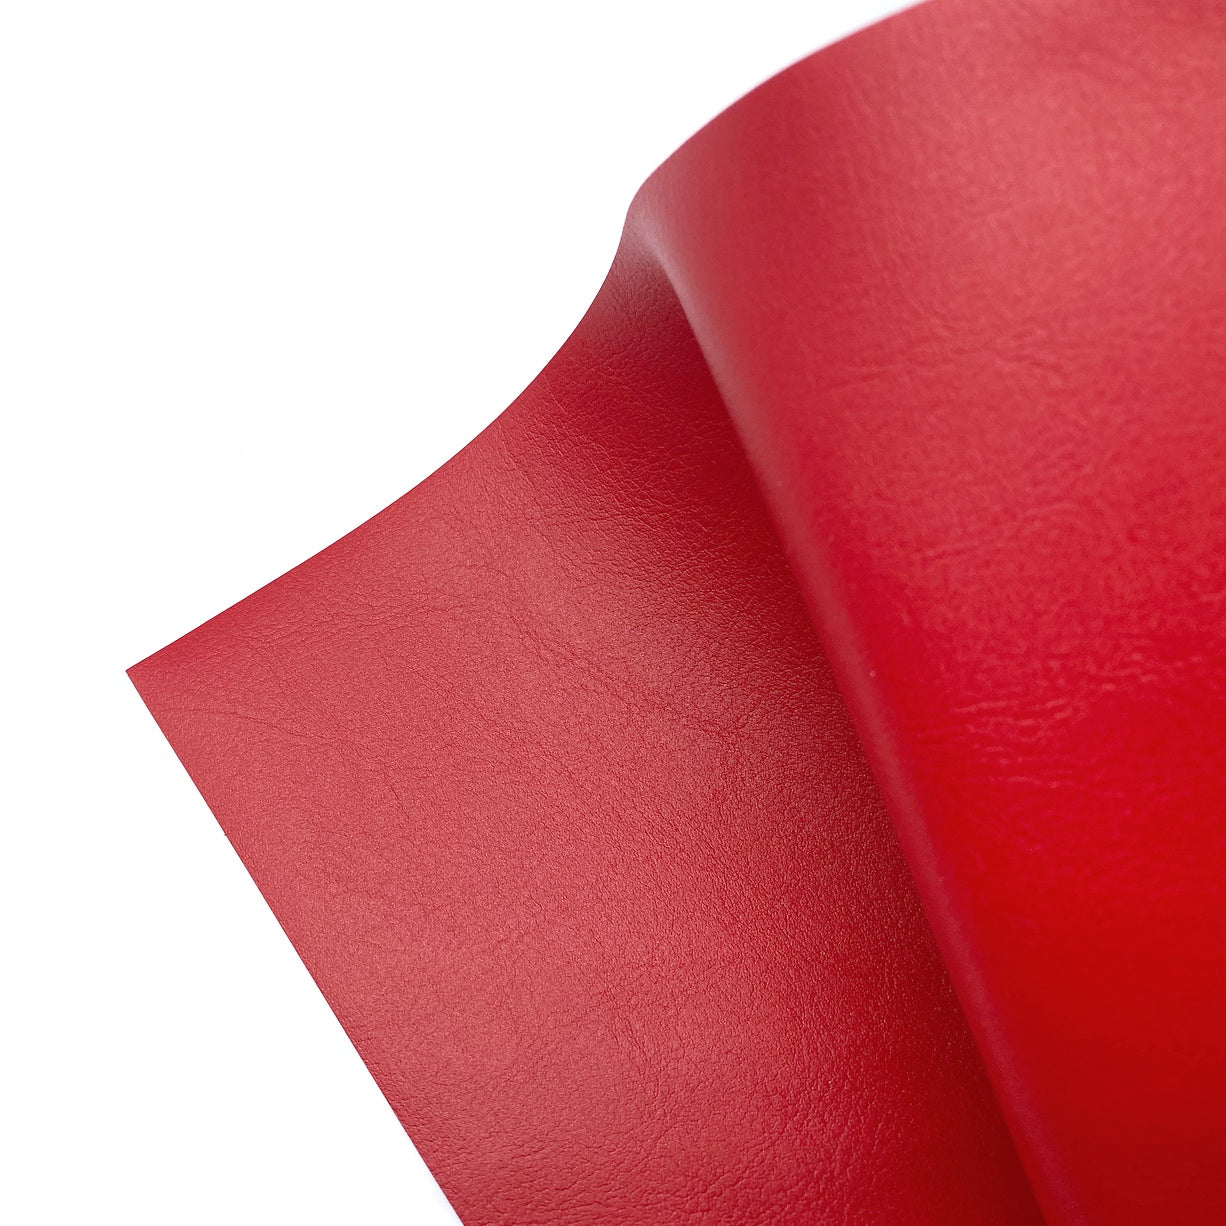 Little Red Core Premium Faux Leather Fabric Sheets